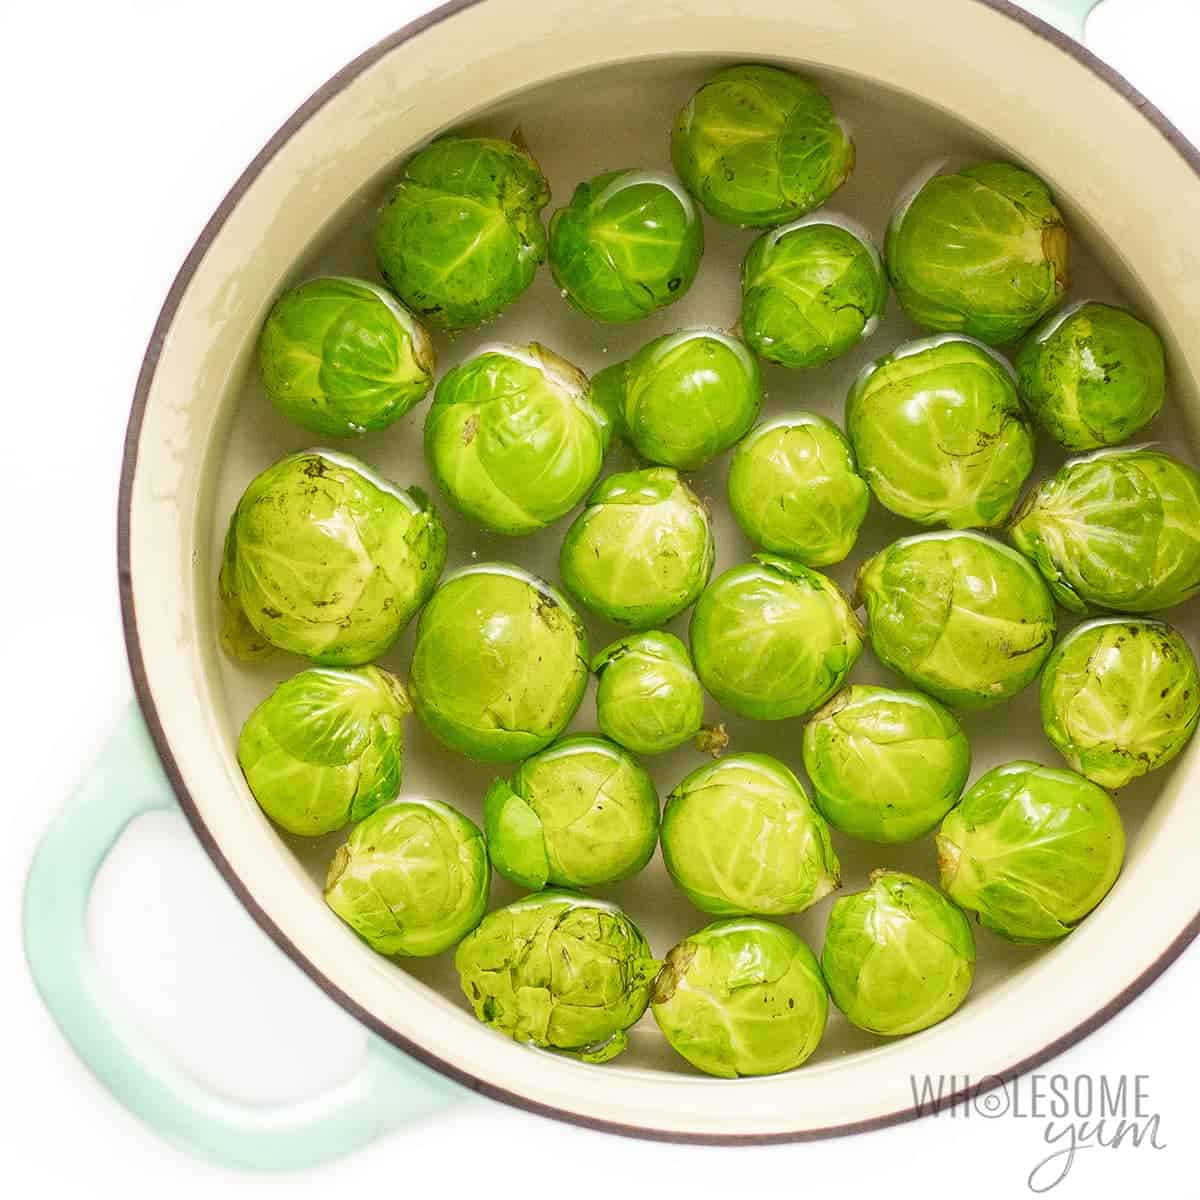 Boiled brussels sprouts in a large pot